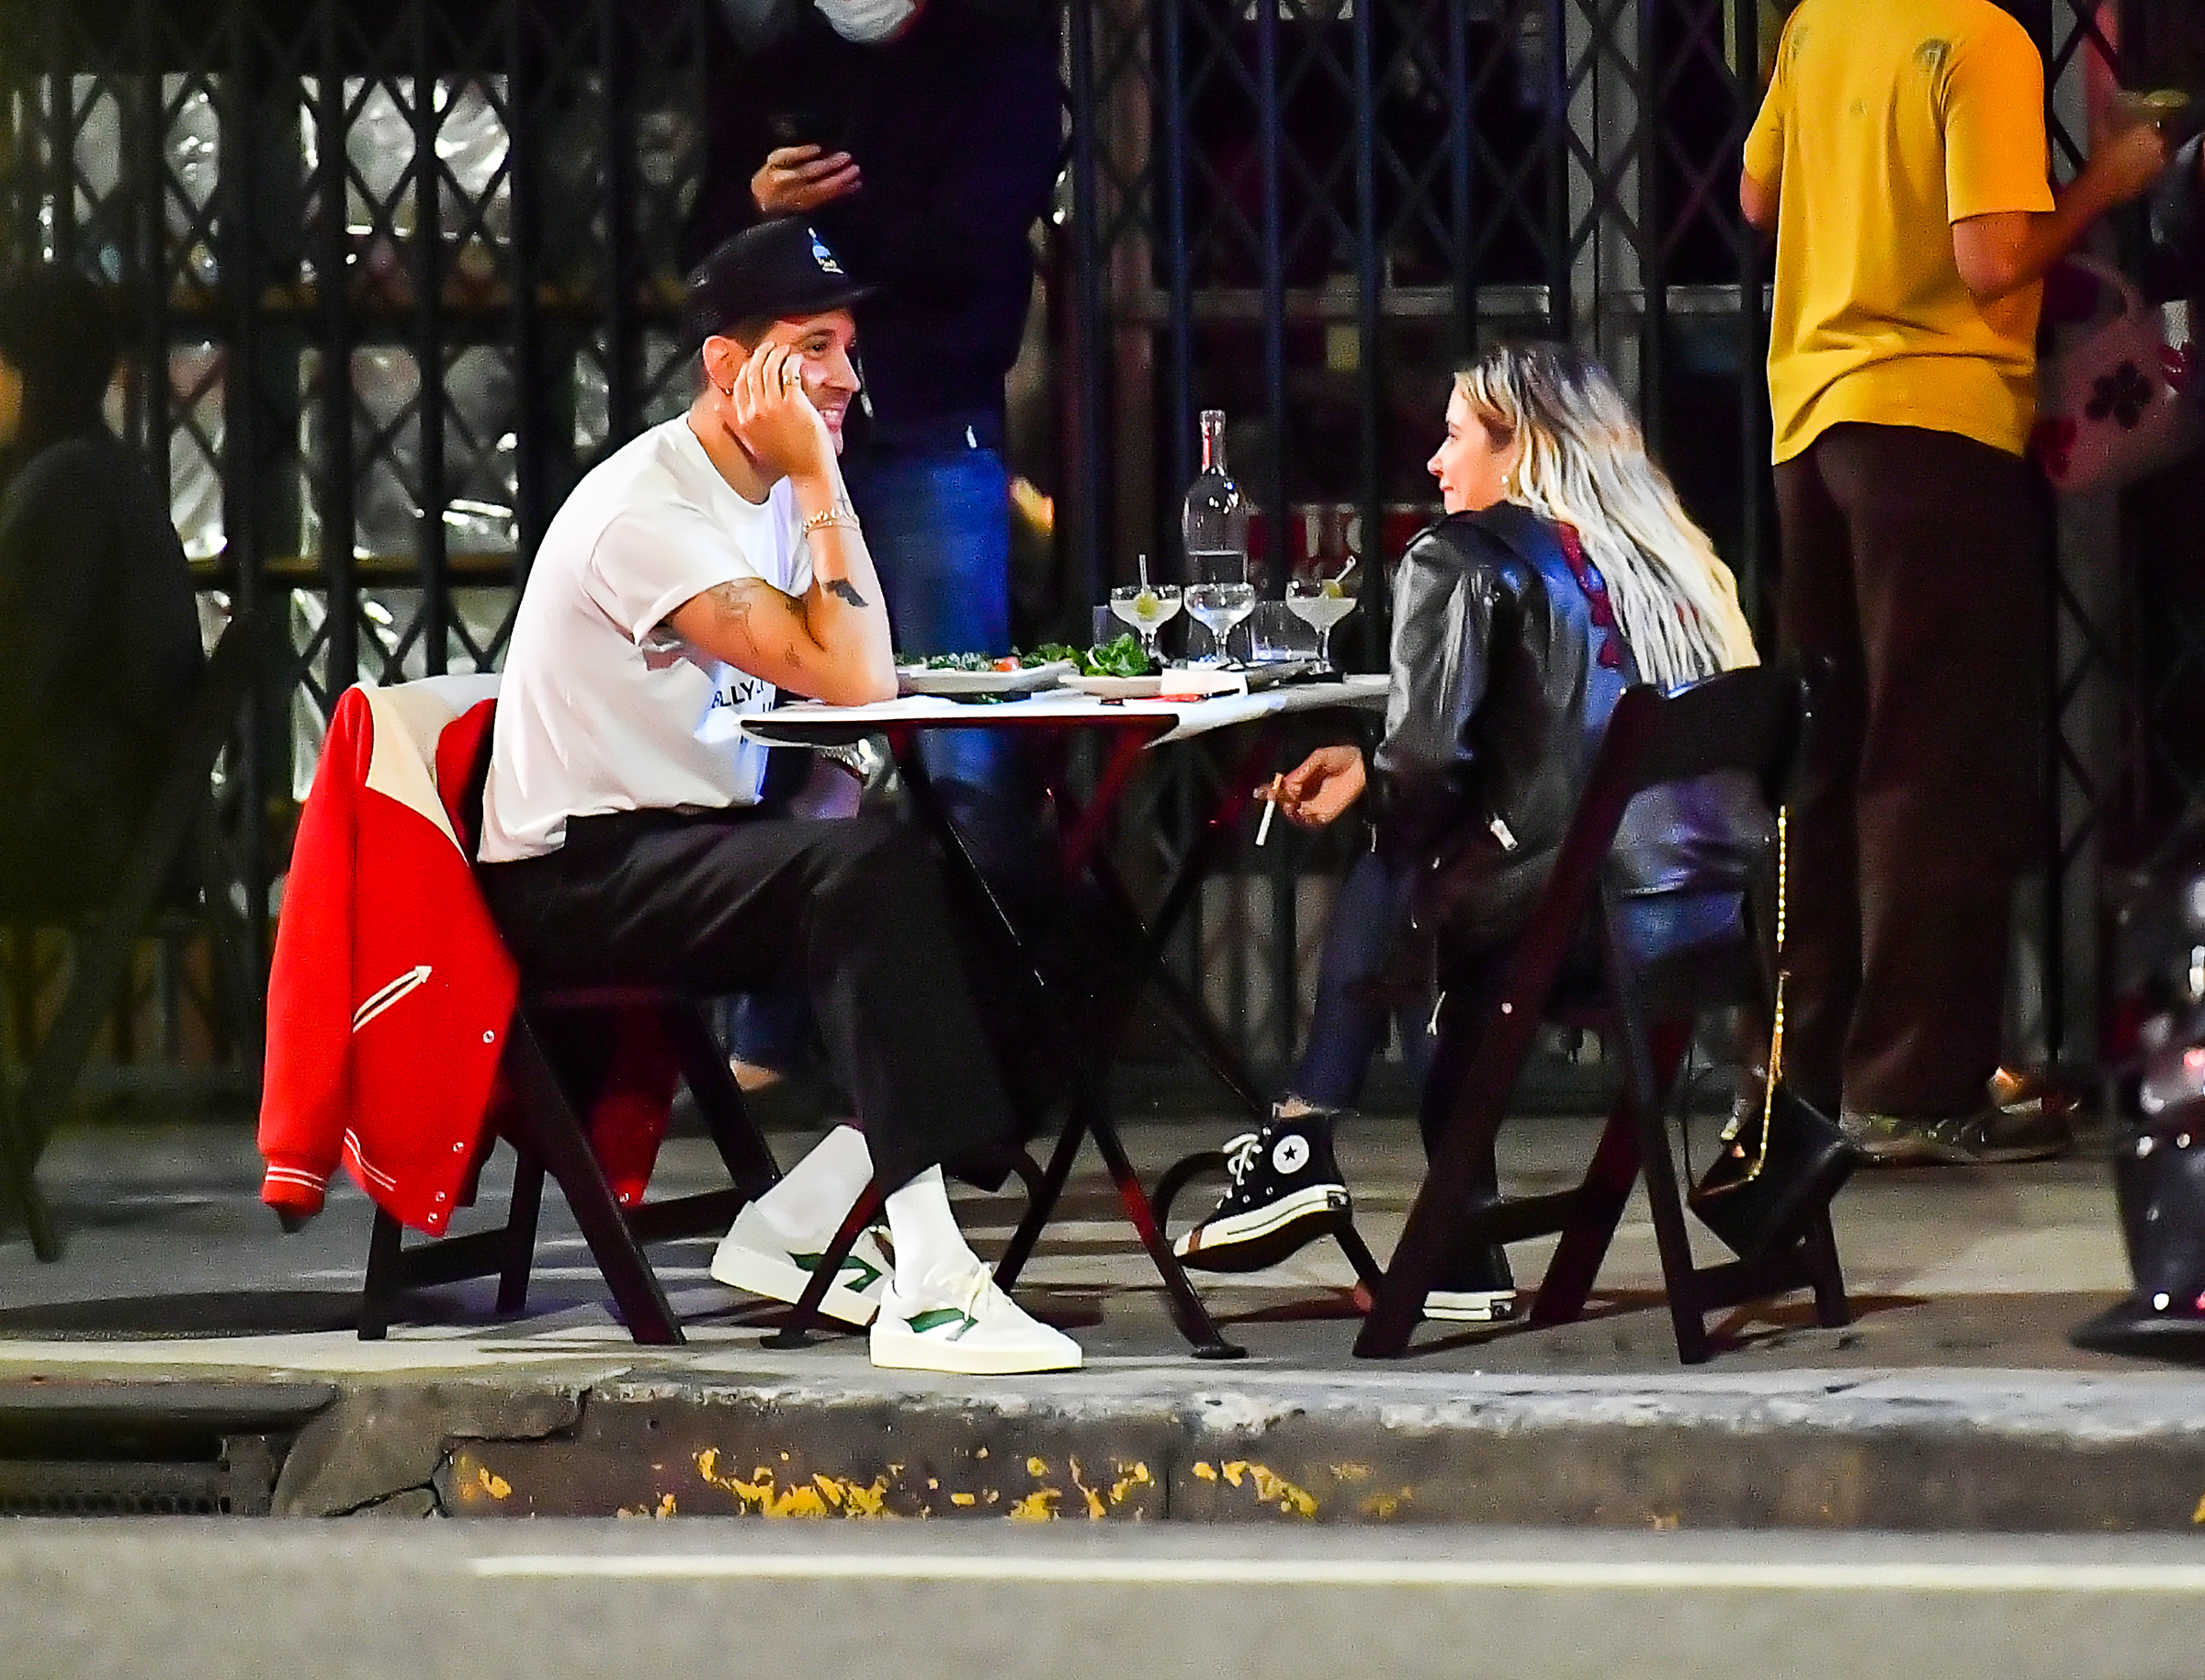 A month after she split from Cara Delevingne, Ashley Benson and G-Eazy were spotted together